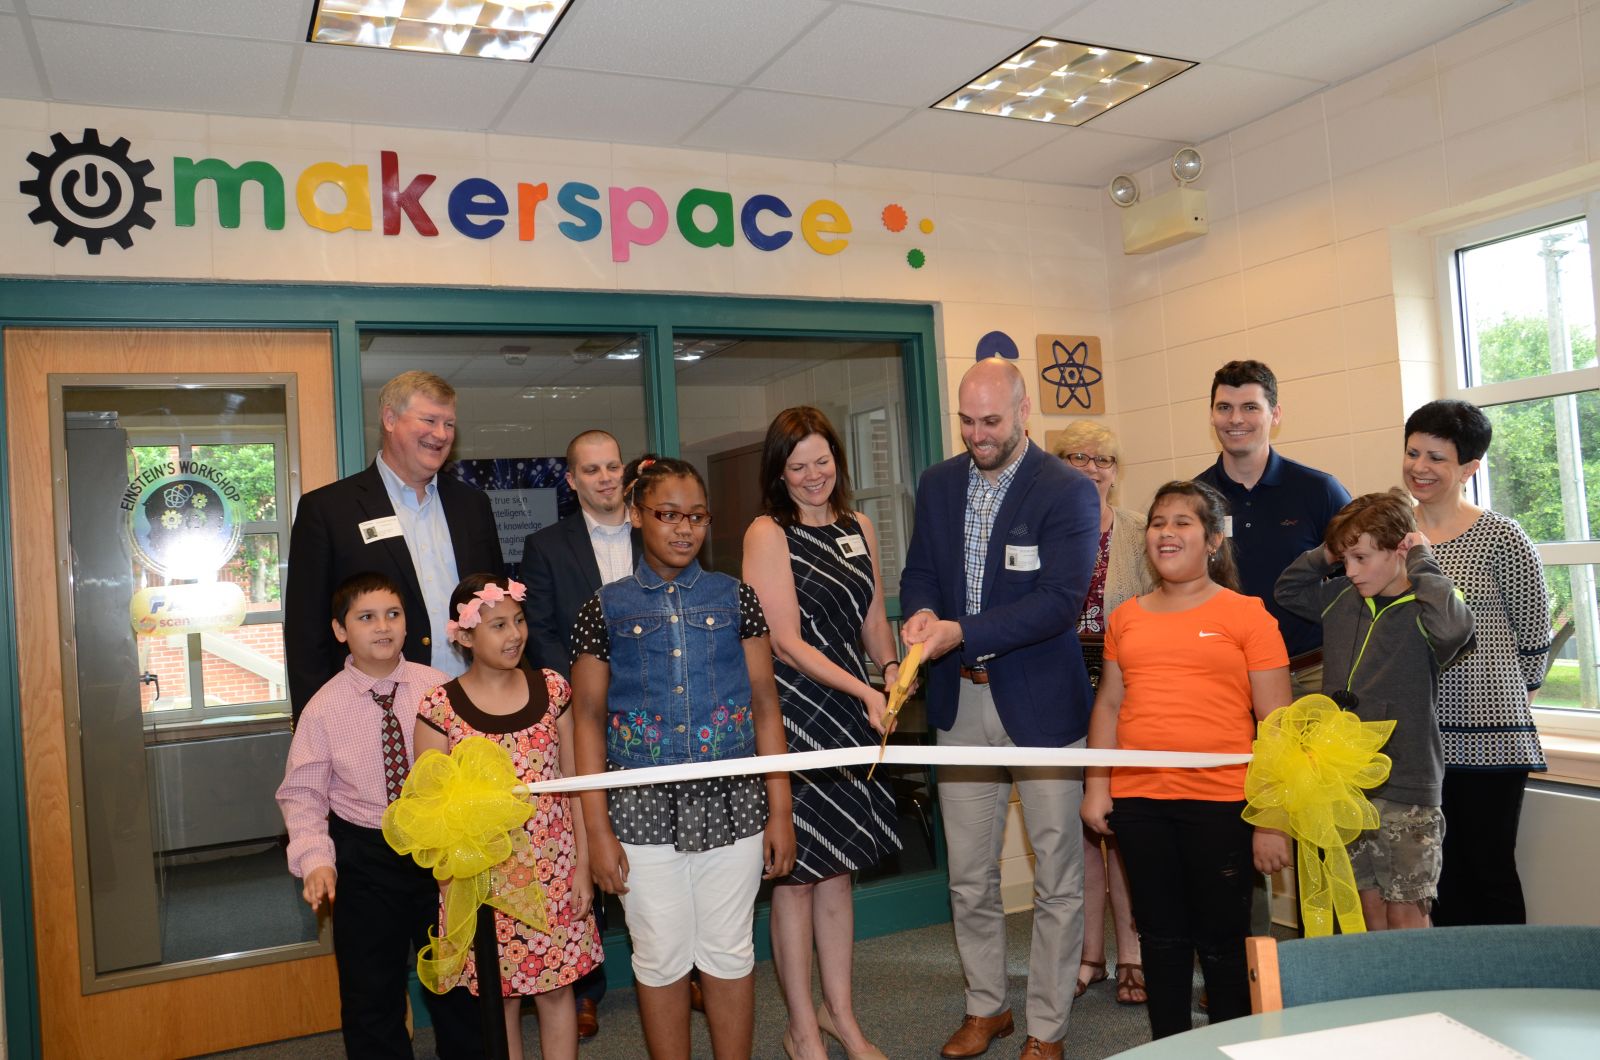 Participating in a ribbon cutting of Einstein's Workshop are, from left, student Azael Cruz, Grant Burns with AFL, student Cailynn-Ann Campos, Josh Sigman with AFL, student Akeylah Howard, Corie Culp with AFL, Joel Douglass with ScanSource, Joan Burkett with ScanSource, student Heilyin Sanchez, Jason Motte with ScanSource, student Cameron Stiff and Jill Kremer with ScanSource. (Photo/Provided)